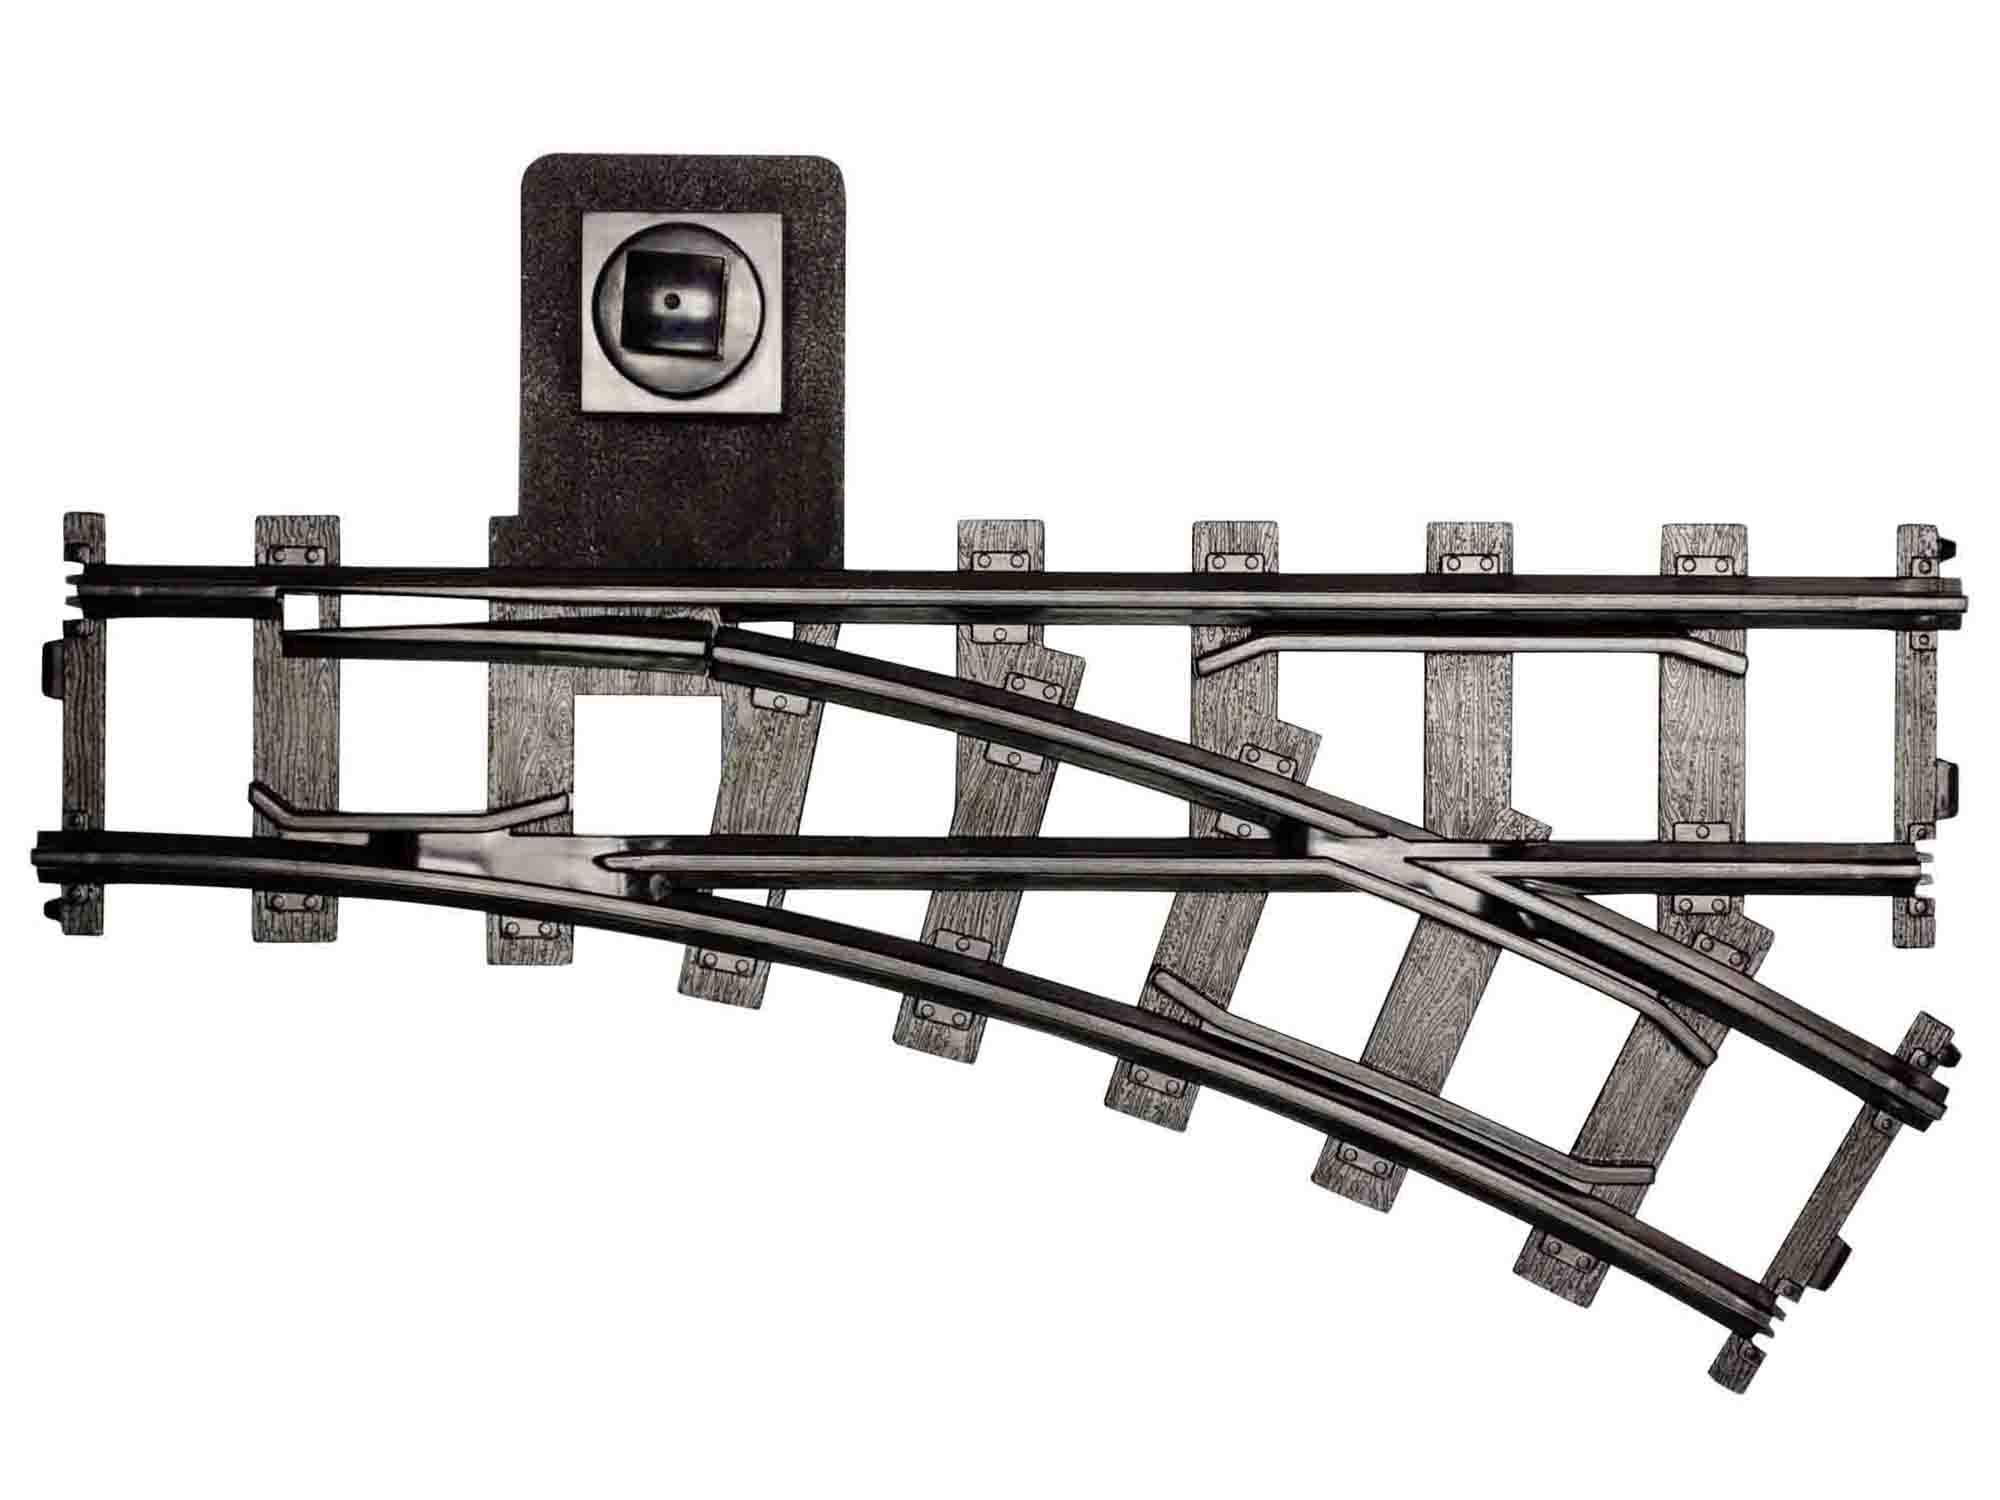 Lionel new 7-11111 G-gauge left hand manual switch *brand new 2014 catalog* 